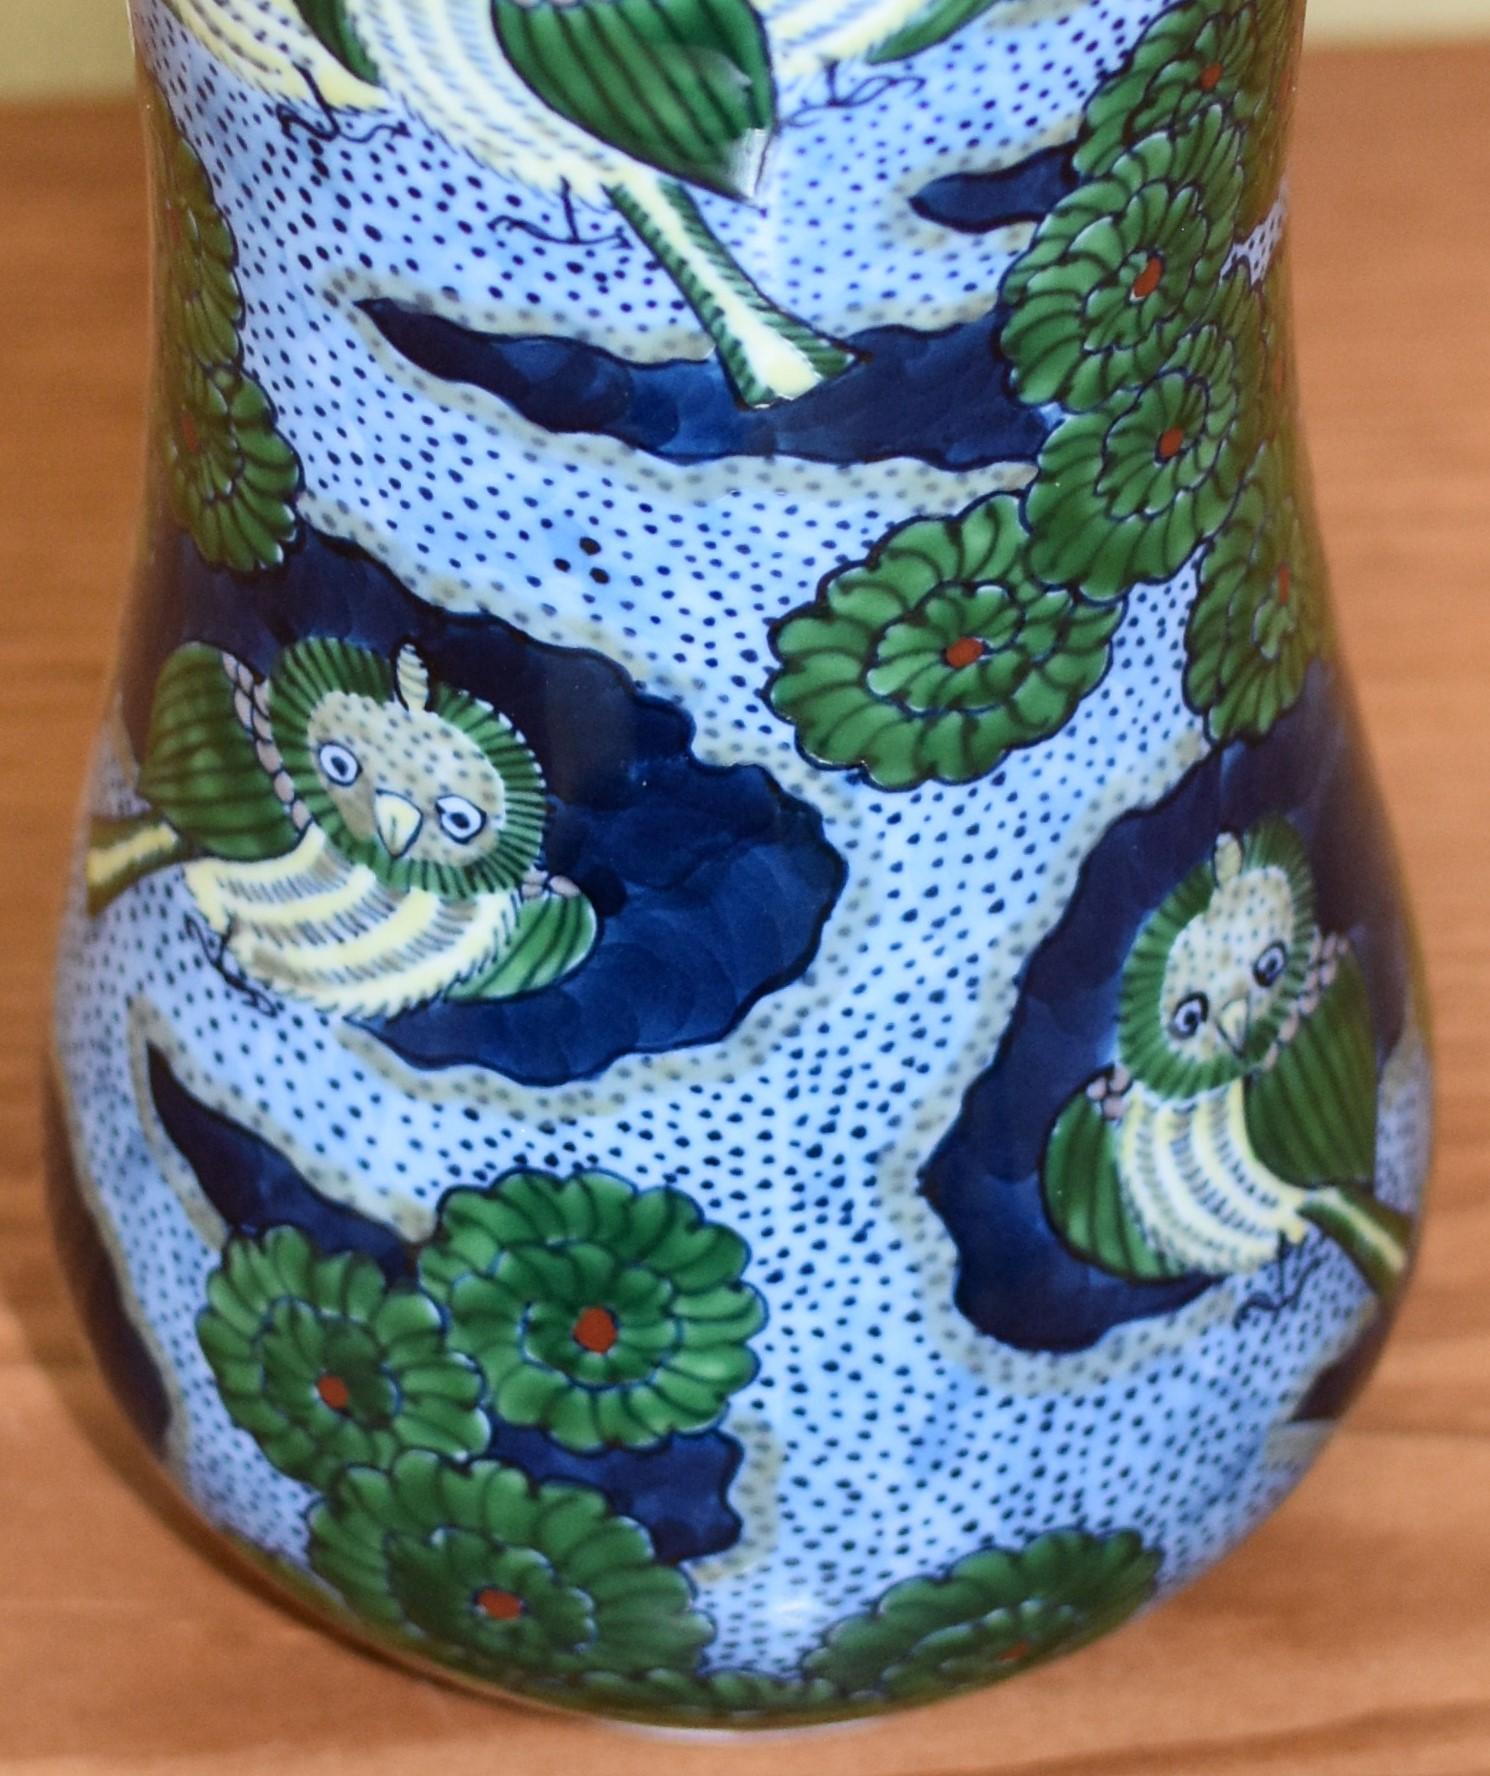 Unique contemporary decorative porcelain vase, intricately hand painted in vivid blue and green on a beautiful tall body, a signed work by second-generation master porcelain artist of the Imari-Arita region of Japan, highly acclaimed for his